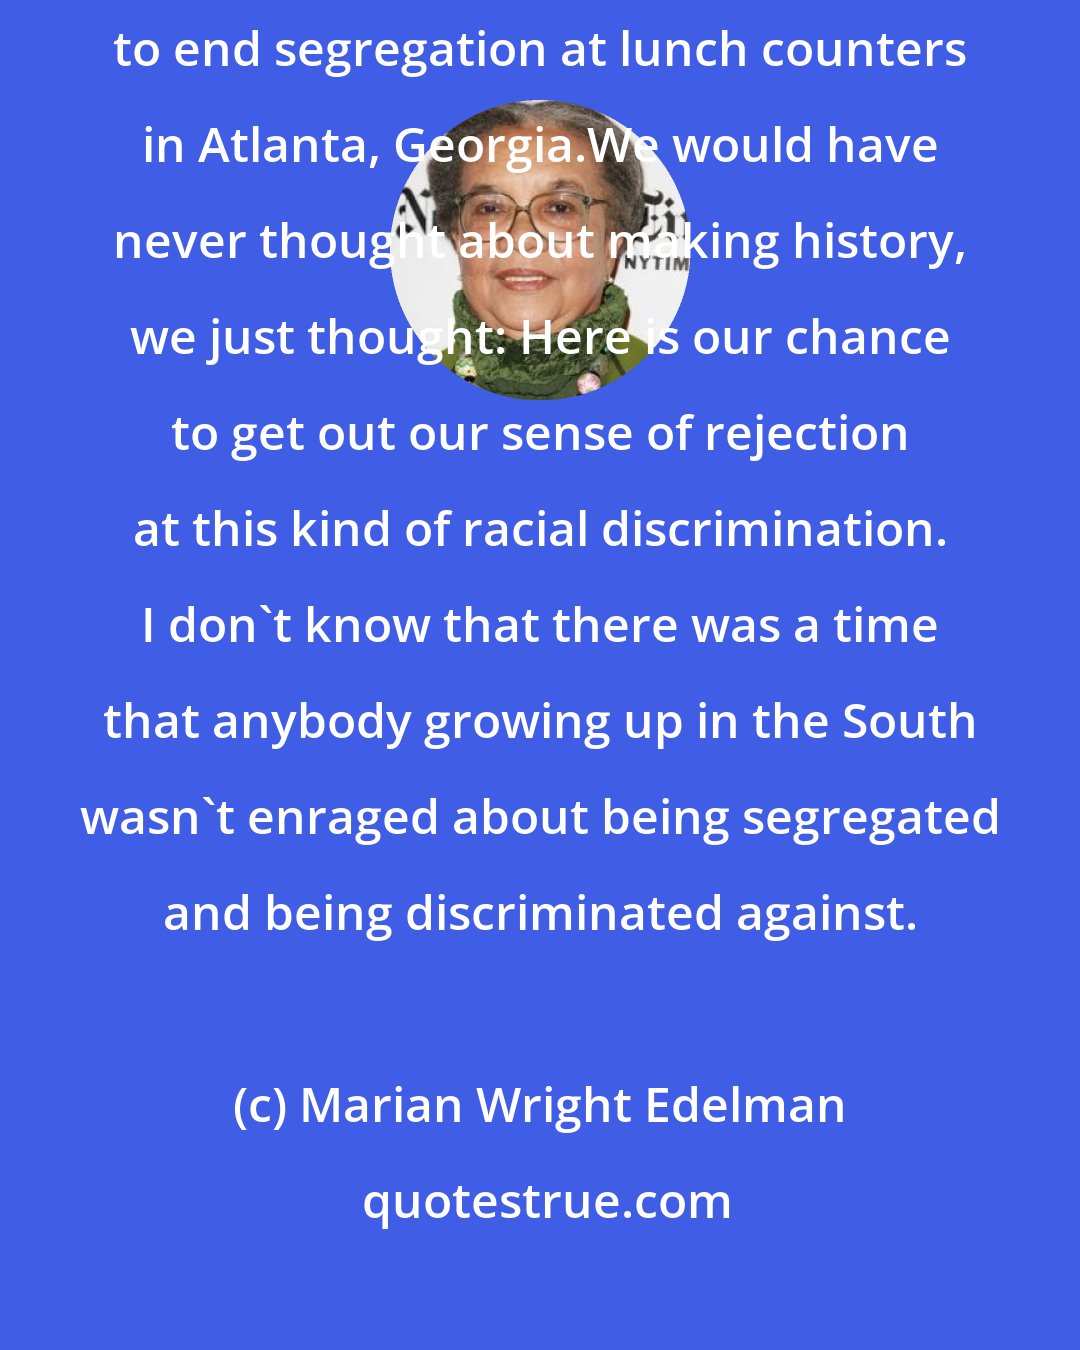 Marian Wright Edelman: I wasn't thinking about history. I was thinking about how we were going to end segregation at lunch counters in Atlanta, Georgia.We would have never thought about making history, we just thought: Here is our chance to get out our sense of rejection at this kind of racial discrimination. I don't know that there was a time that anybody growing up in the South wasn't enraged about being segregated and being discriminated against.